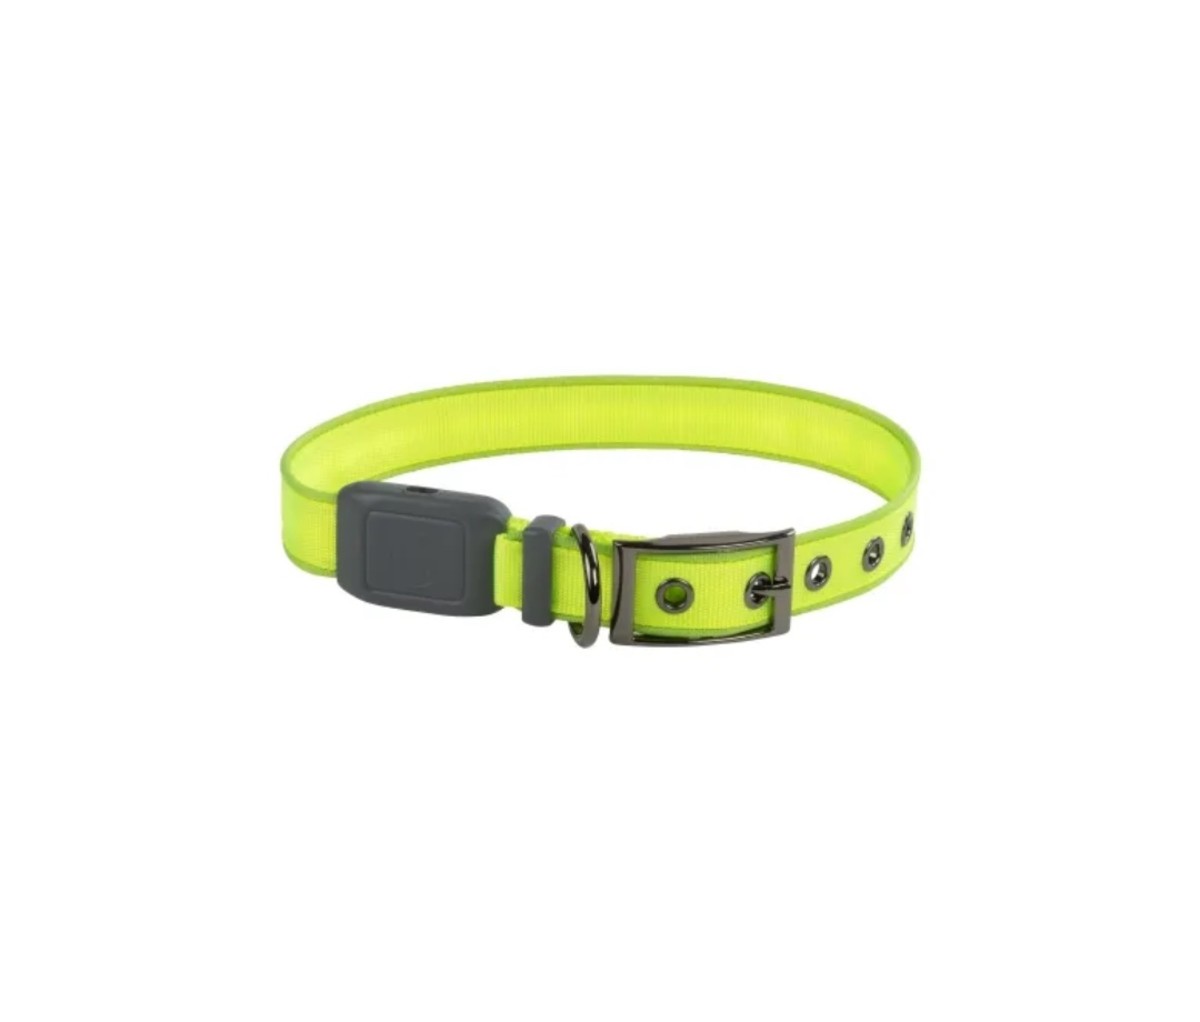 Keep an eye on your dog in the dark with the Nite Ice LED Dog Collar.